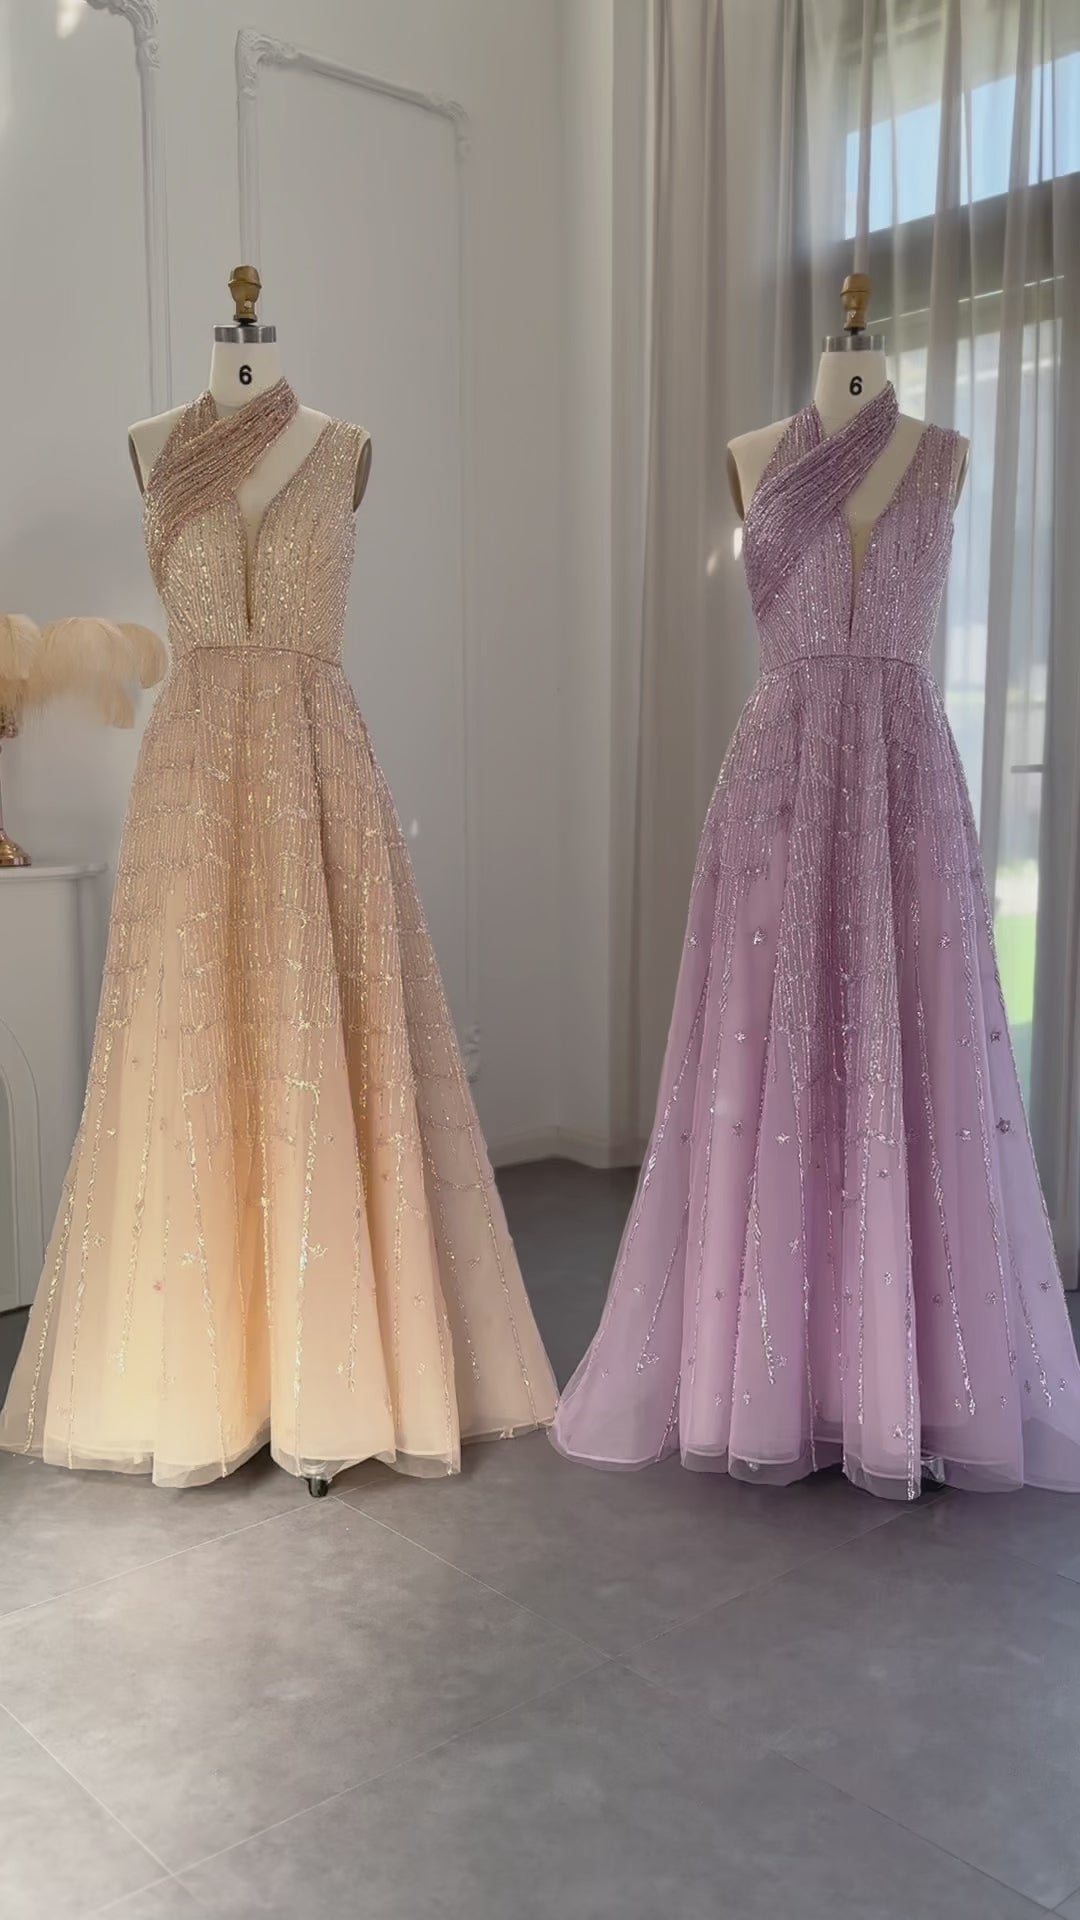 Dreamy Vow Luxury Beaded Dubai Lilac Evening Dresses for Women Wedding Party 2023 Elegant Long Arabic Prom Formal Gowns SS329